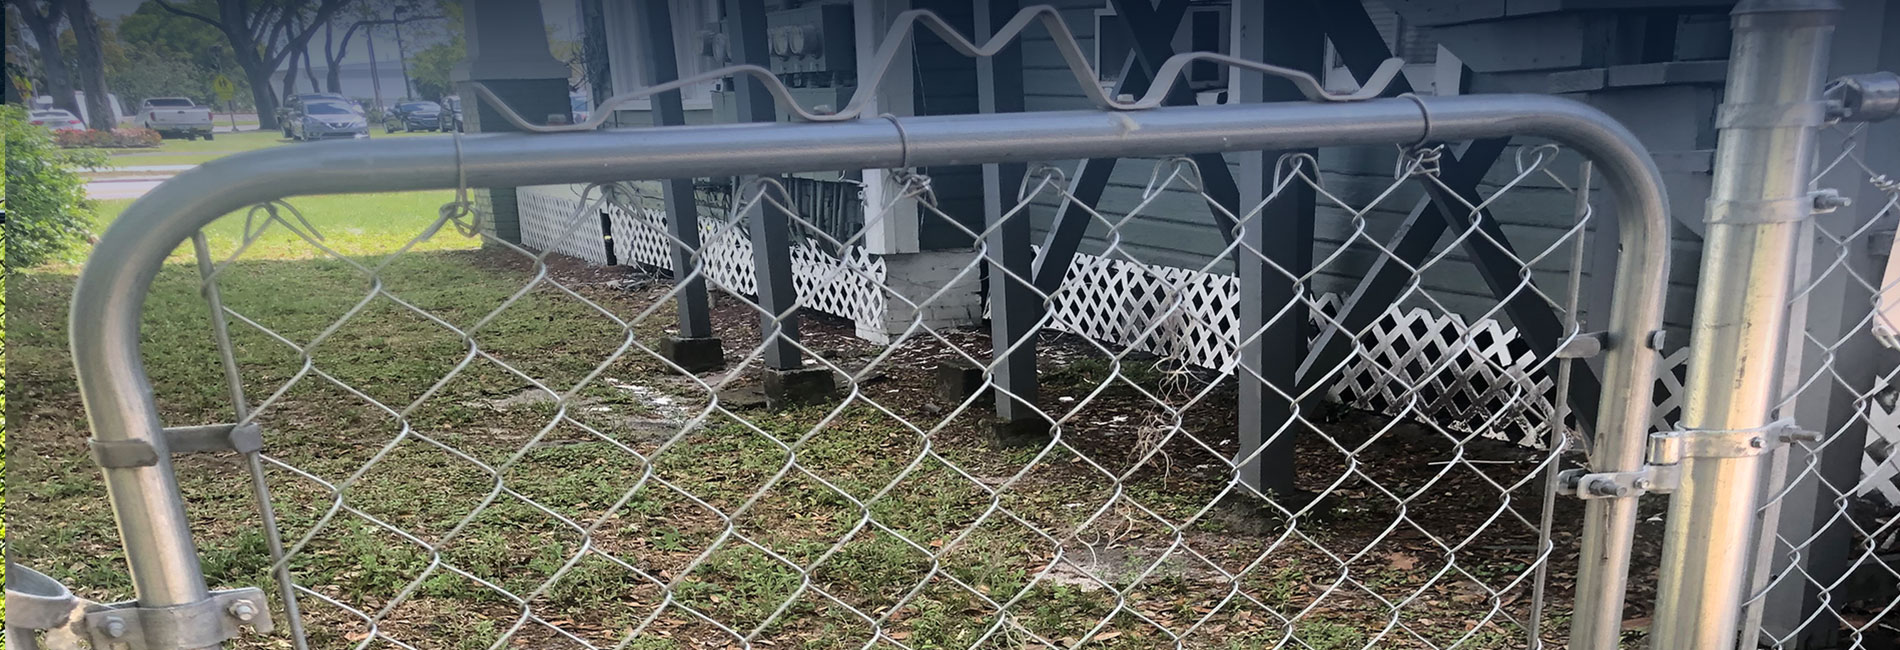 Galvanized Residential Tube with chain link fence gate